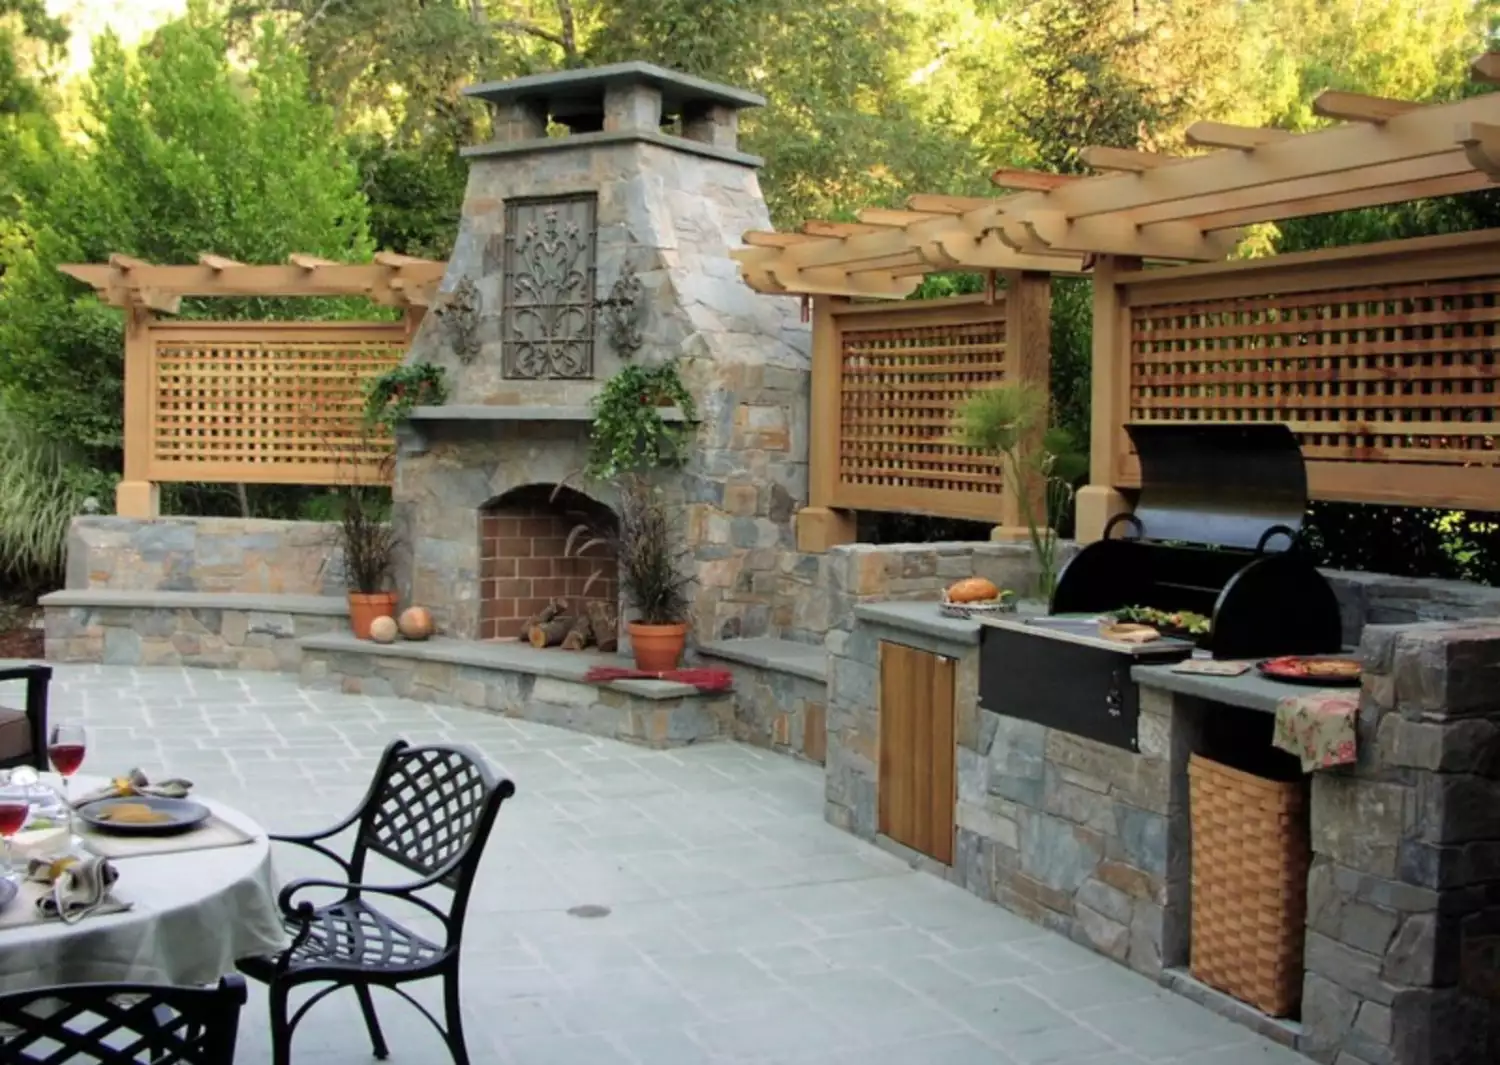 26 dreamy outdoor kitchen ideas for nature lovers